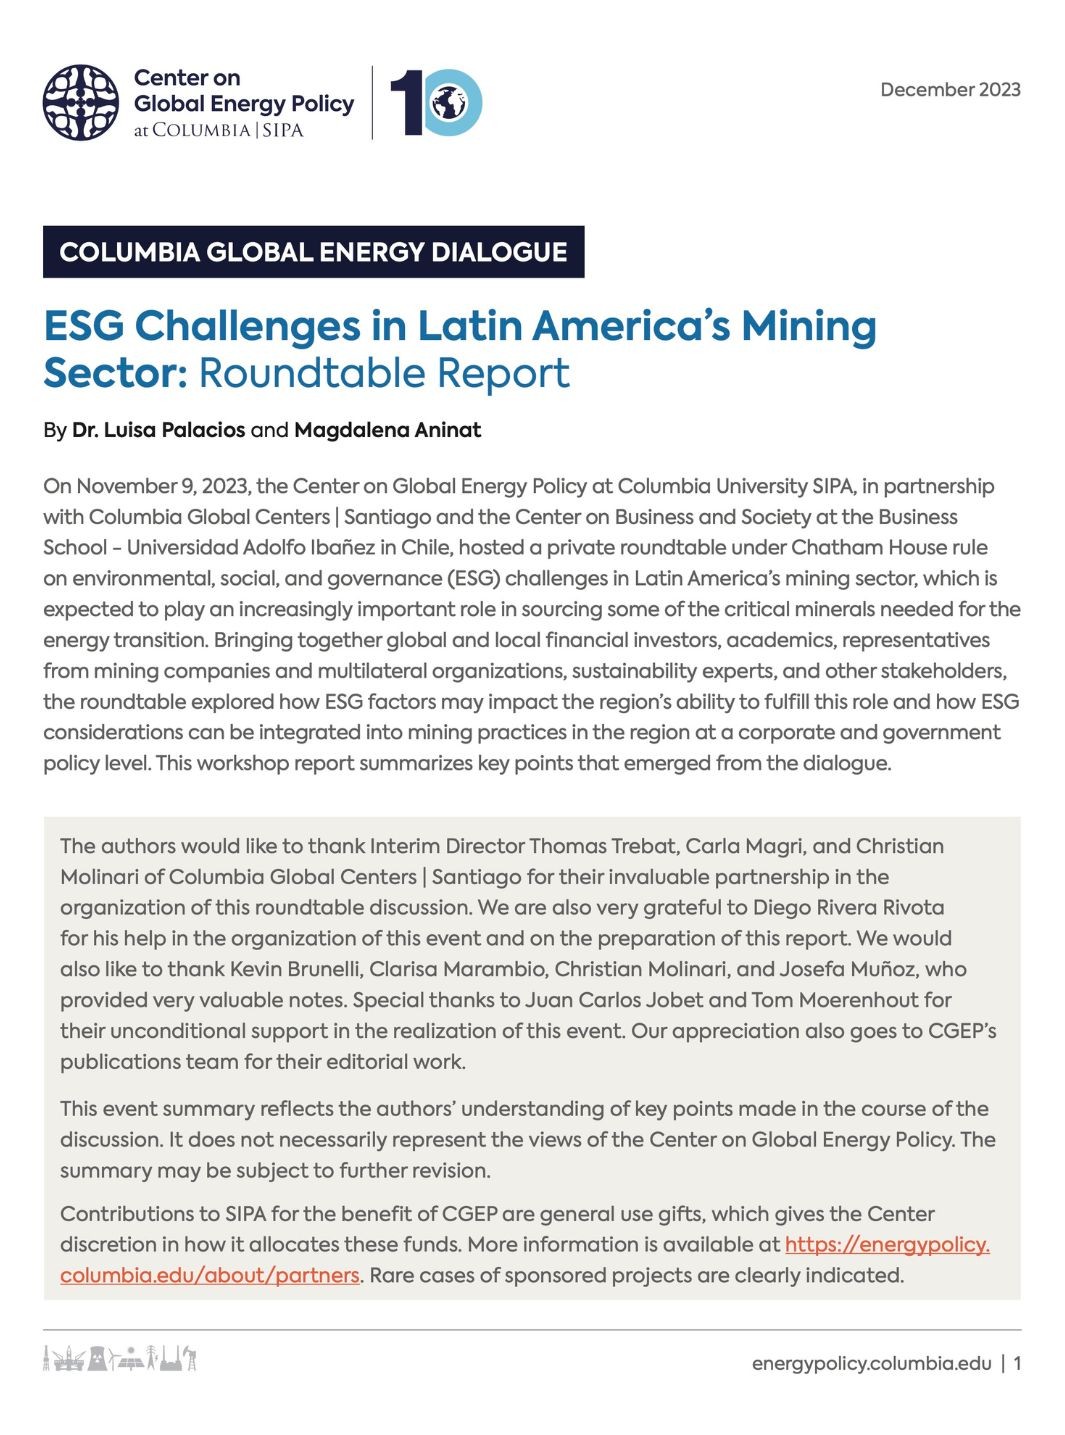 Columbia Global Energy Dialogue: ESG Challenges in Latin America’s Mining Sector: Roundtable Report